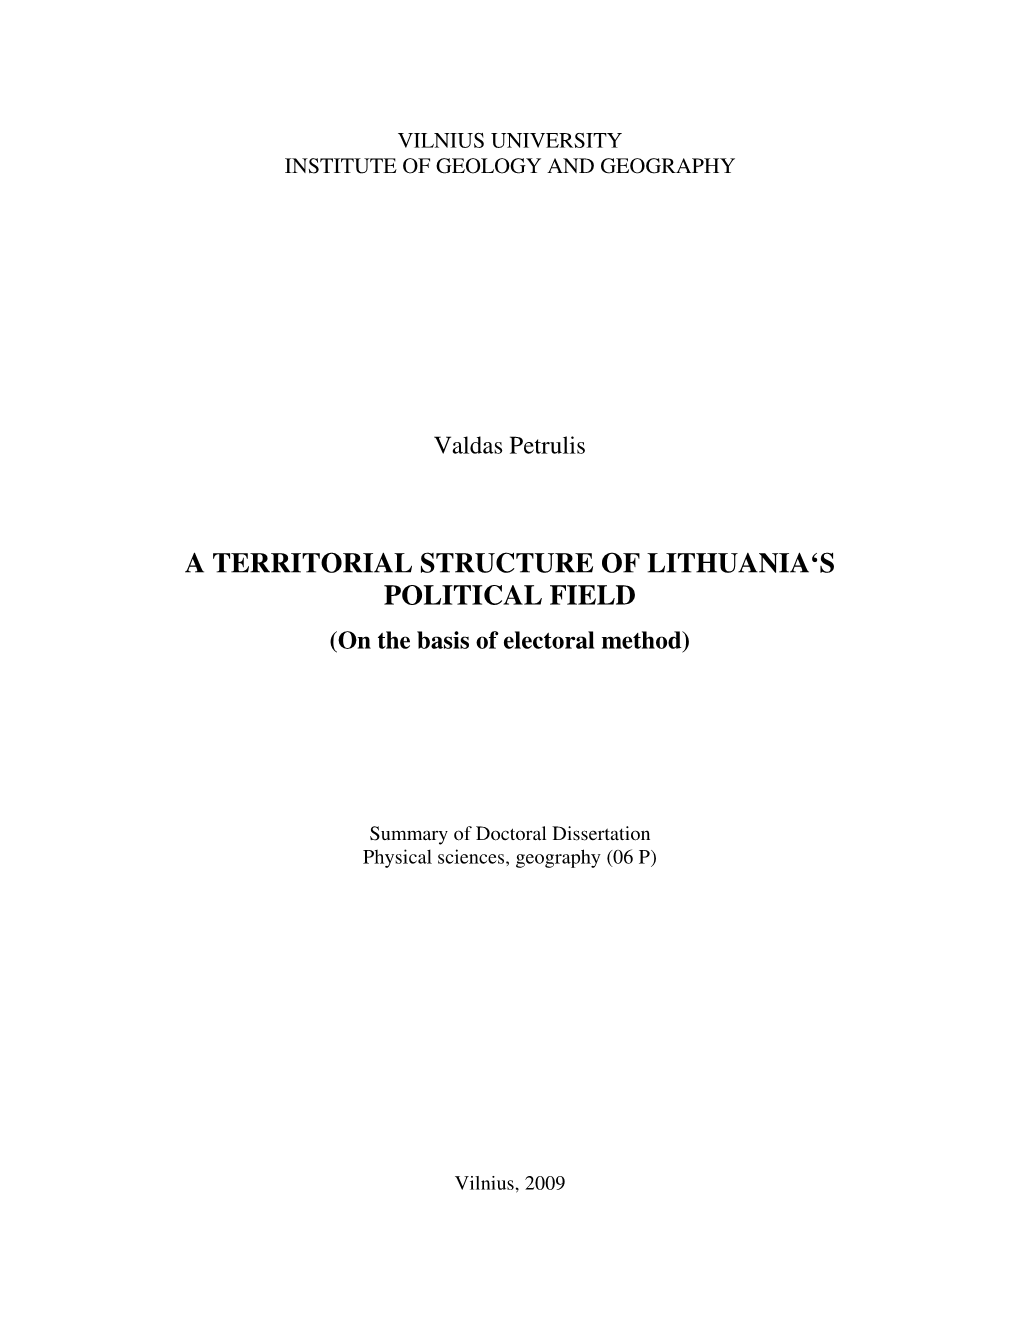 A Territorial Structure of Lithuania's Political Field